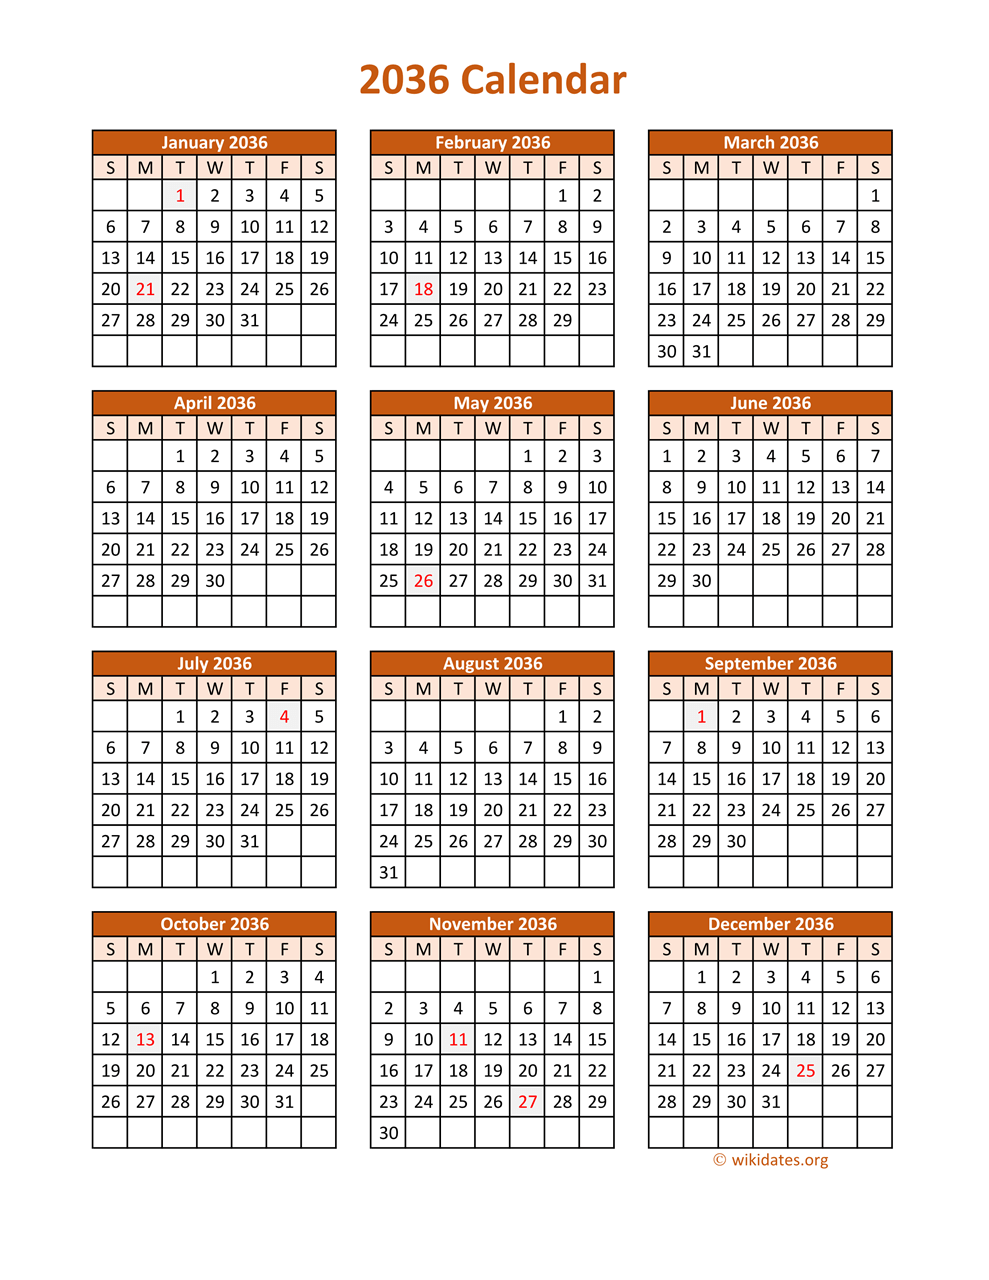 full-year-2036-calendar-on-one-page-wikidates